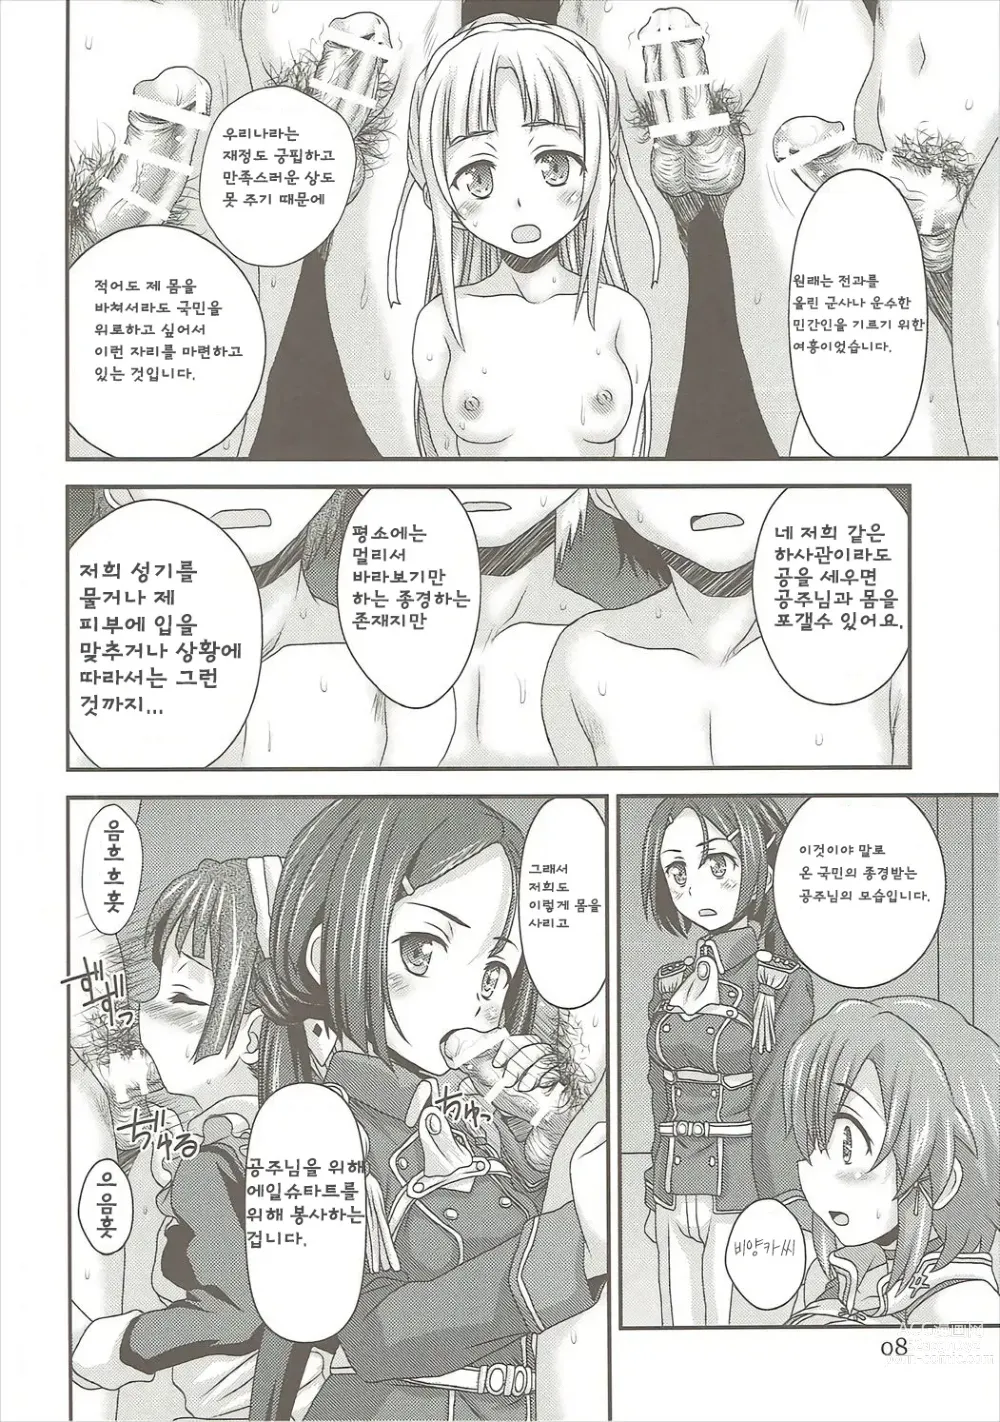 Page 7 of doujinshi Mein Stern